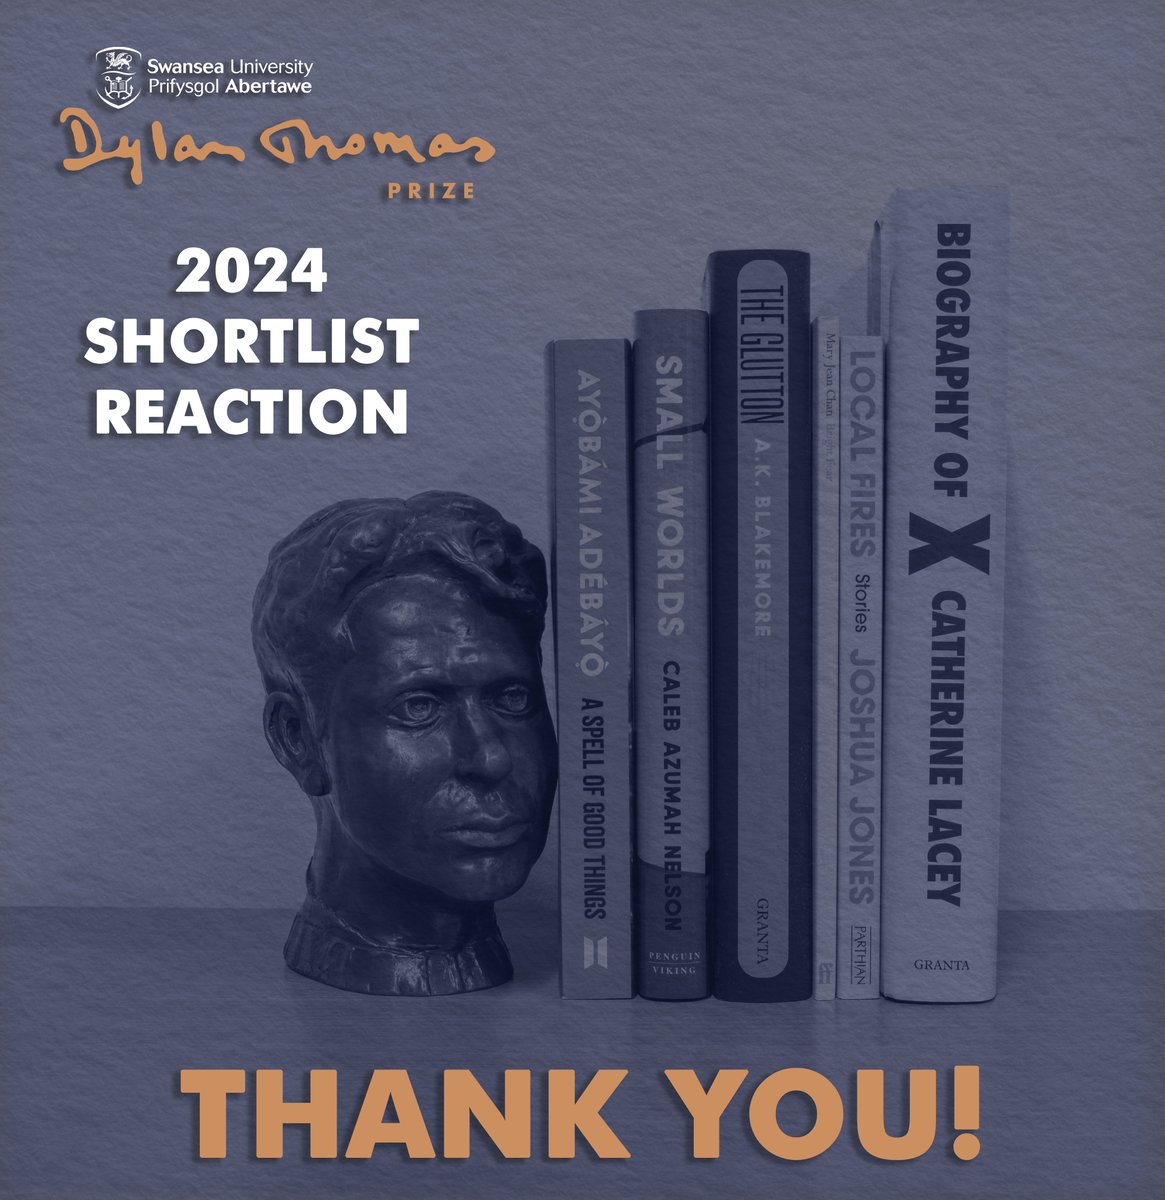 😀 We have received a deluge of wonderful comments since we announced our 2024 shortlist, yesterday. Your words are a true testament to the talent of the 6 young writers that are featured. Thank you! #SUDTP24 👍 📚 Discover the shortlist: swan.ac/SUDTP24Short